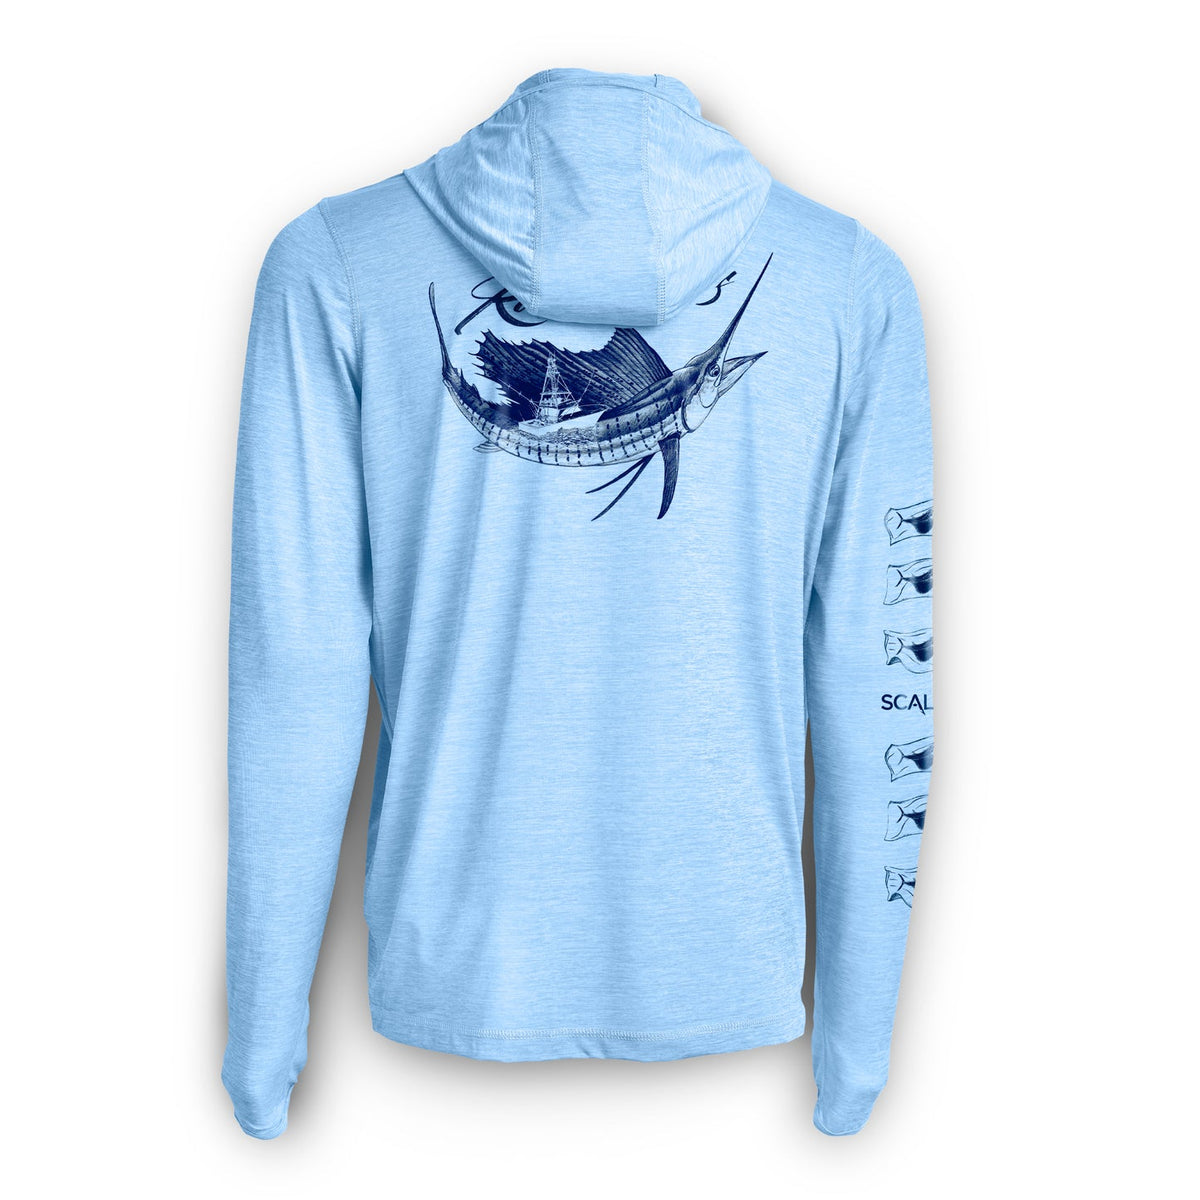 SCLAES Popping Sails Active Performance Hooded Long Sleeve